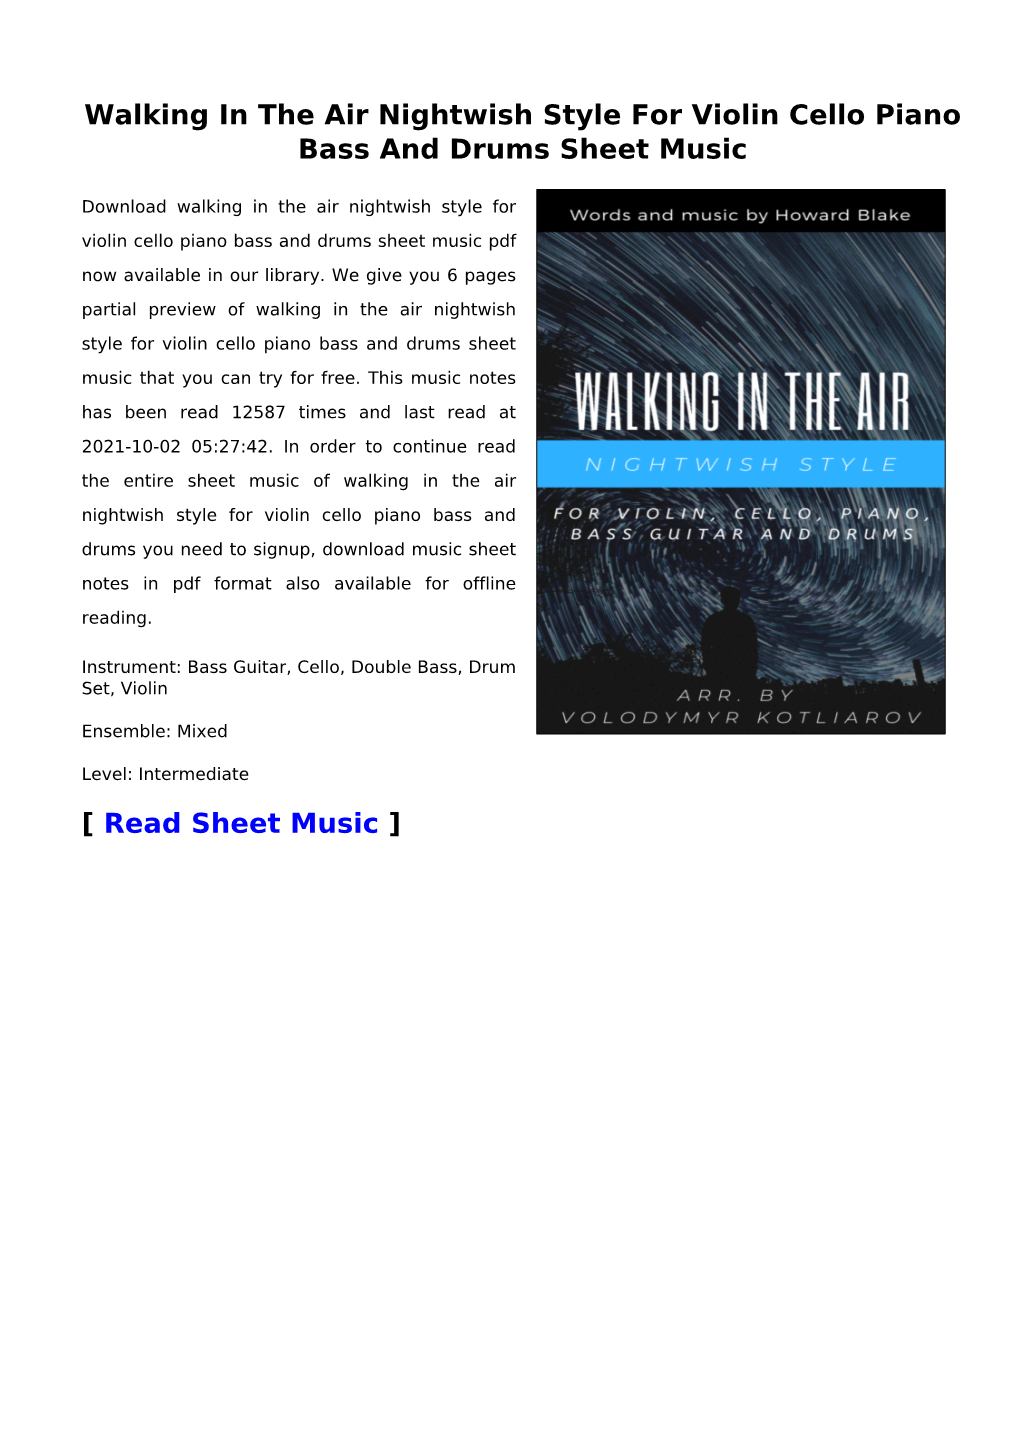 Walking in the Air Nightwish Style for Violin Cello Piano Bass and Drums Sheet Music